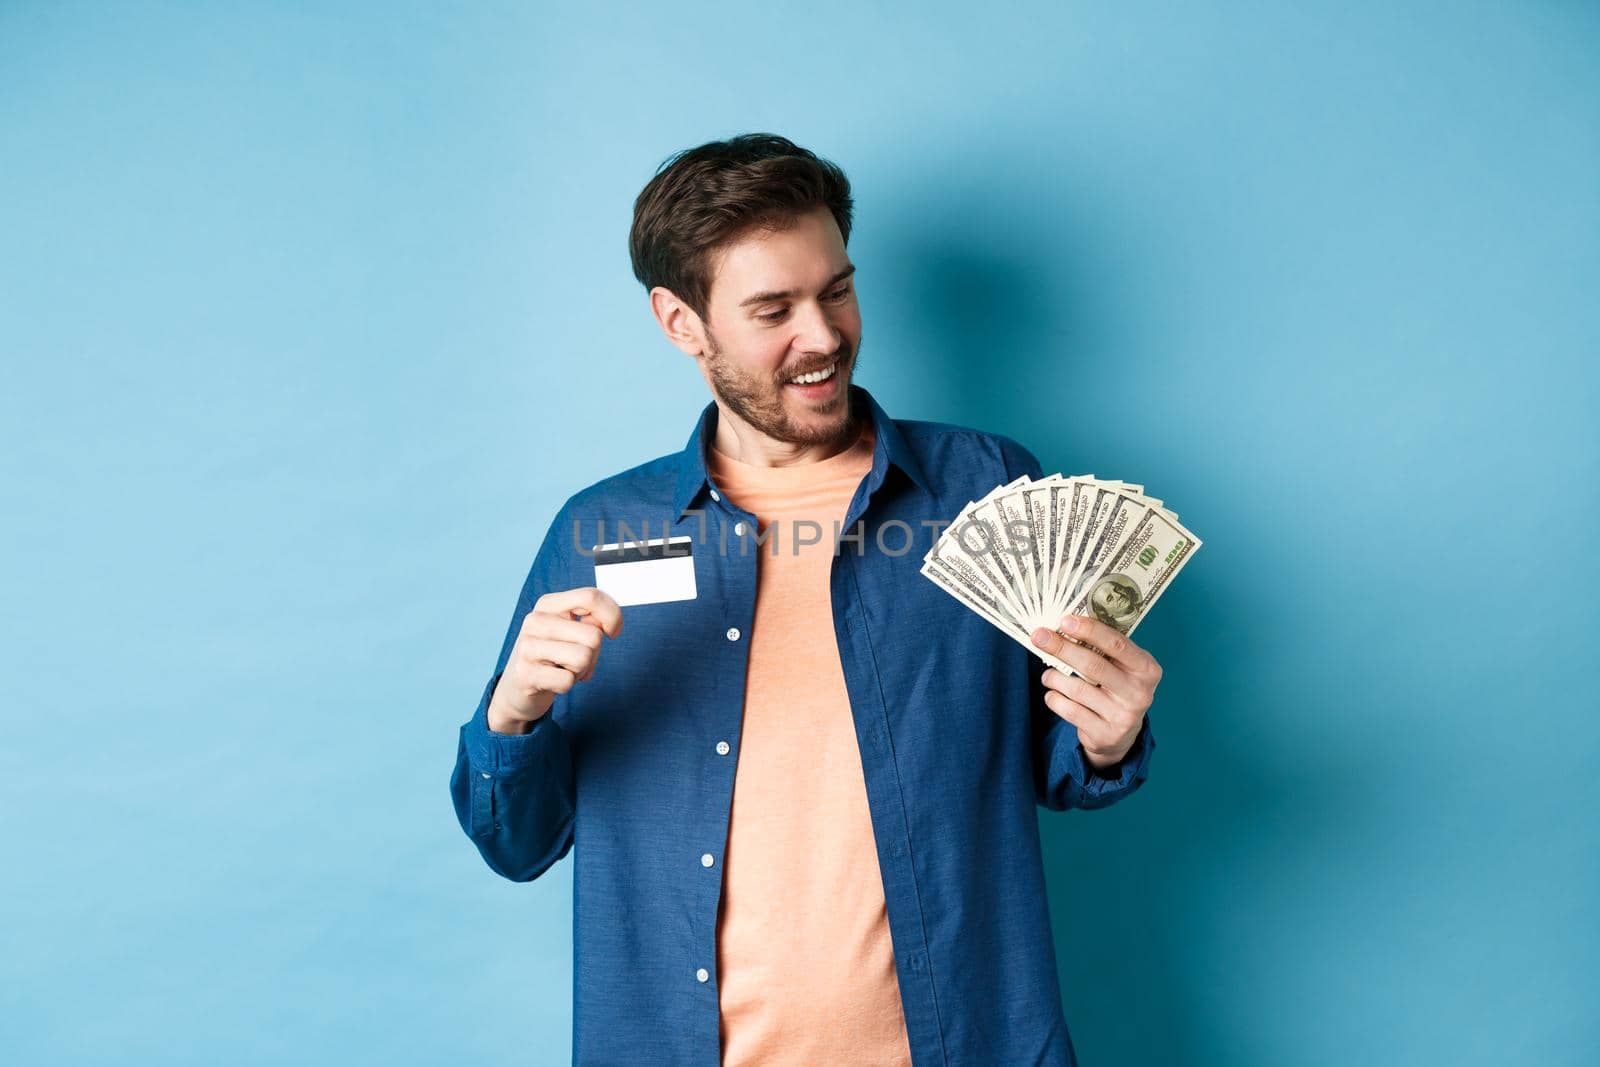 Smiling modern guy looking at cash and showing plastic credit card, standing on blue background. Copy space